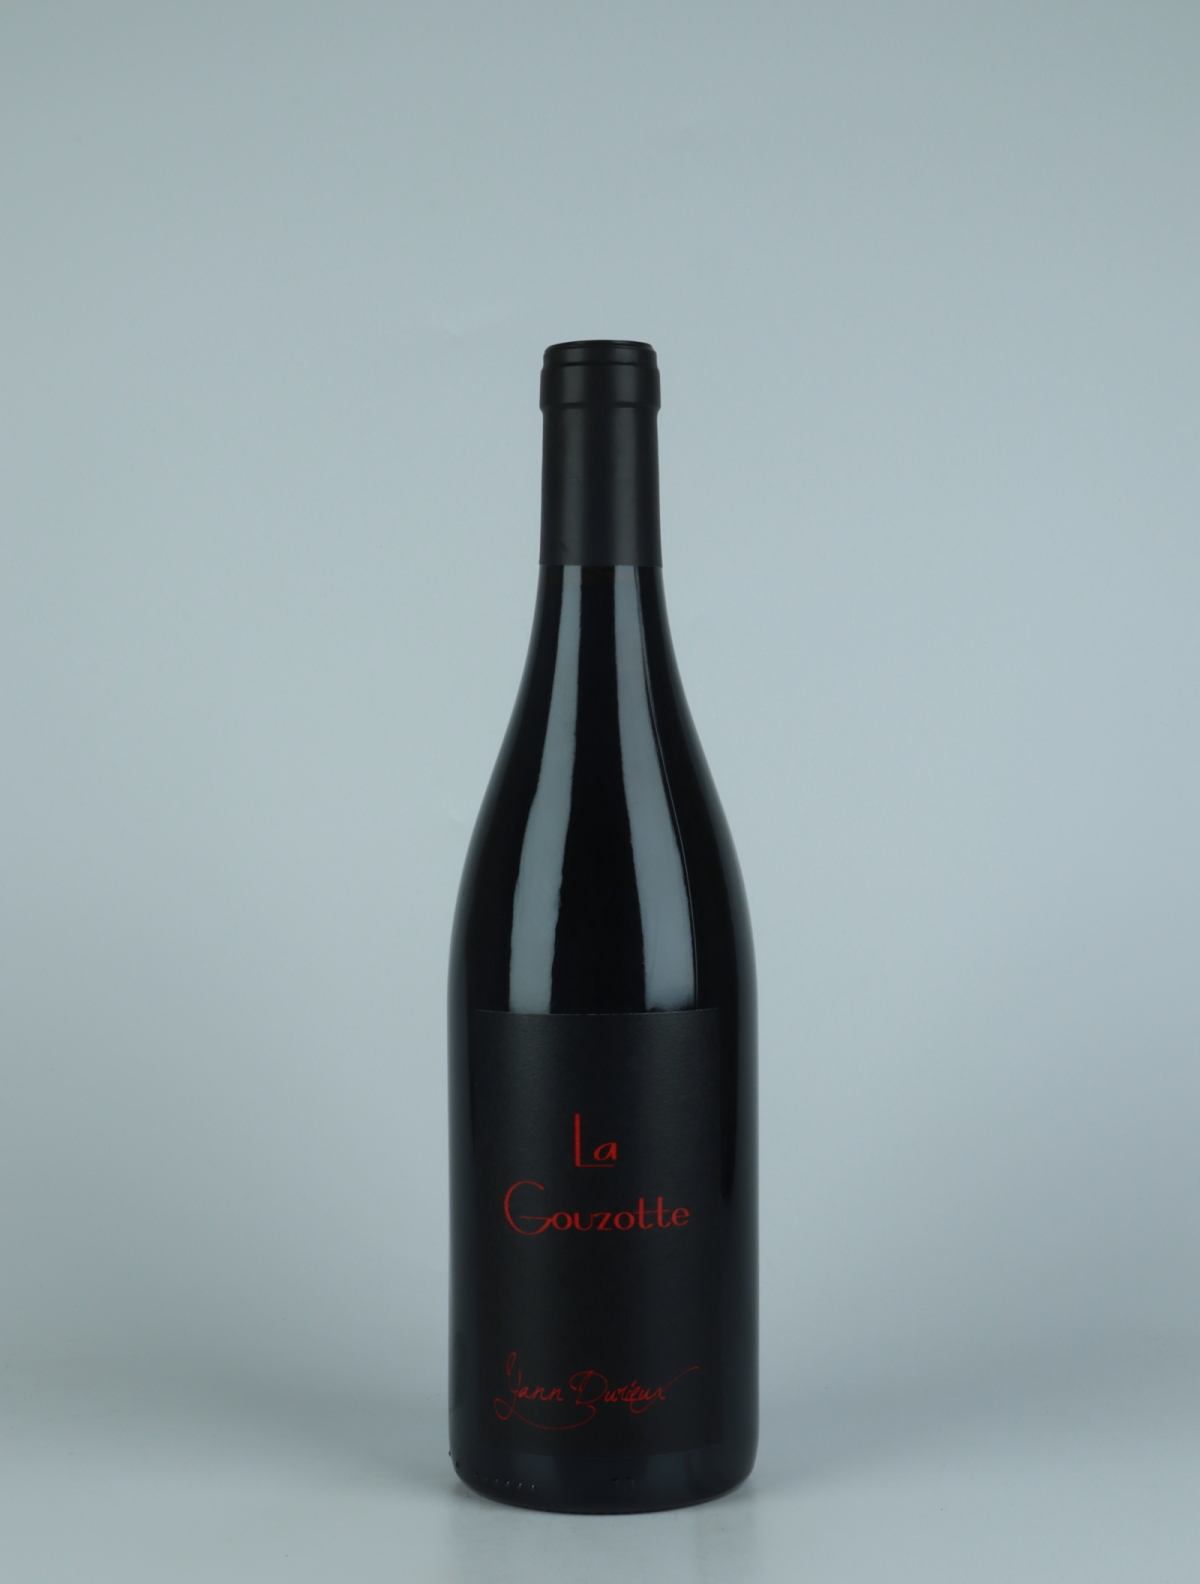 A bottle 2020 La Gouzotte Red wine from Yann Durieux, Burgundy in France